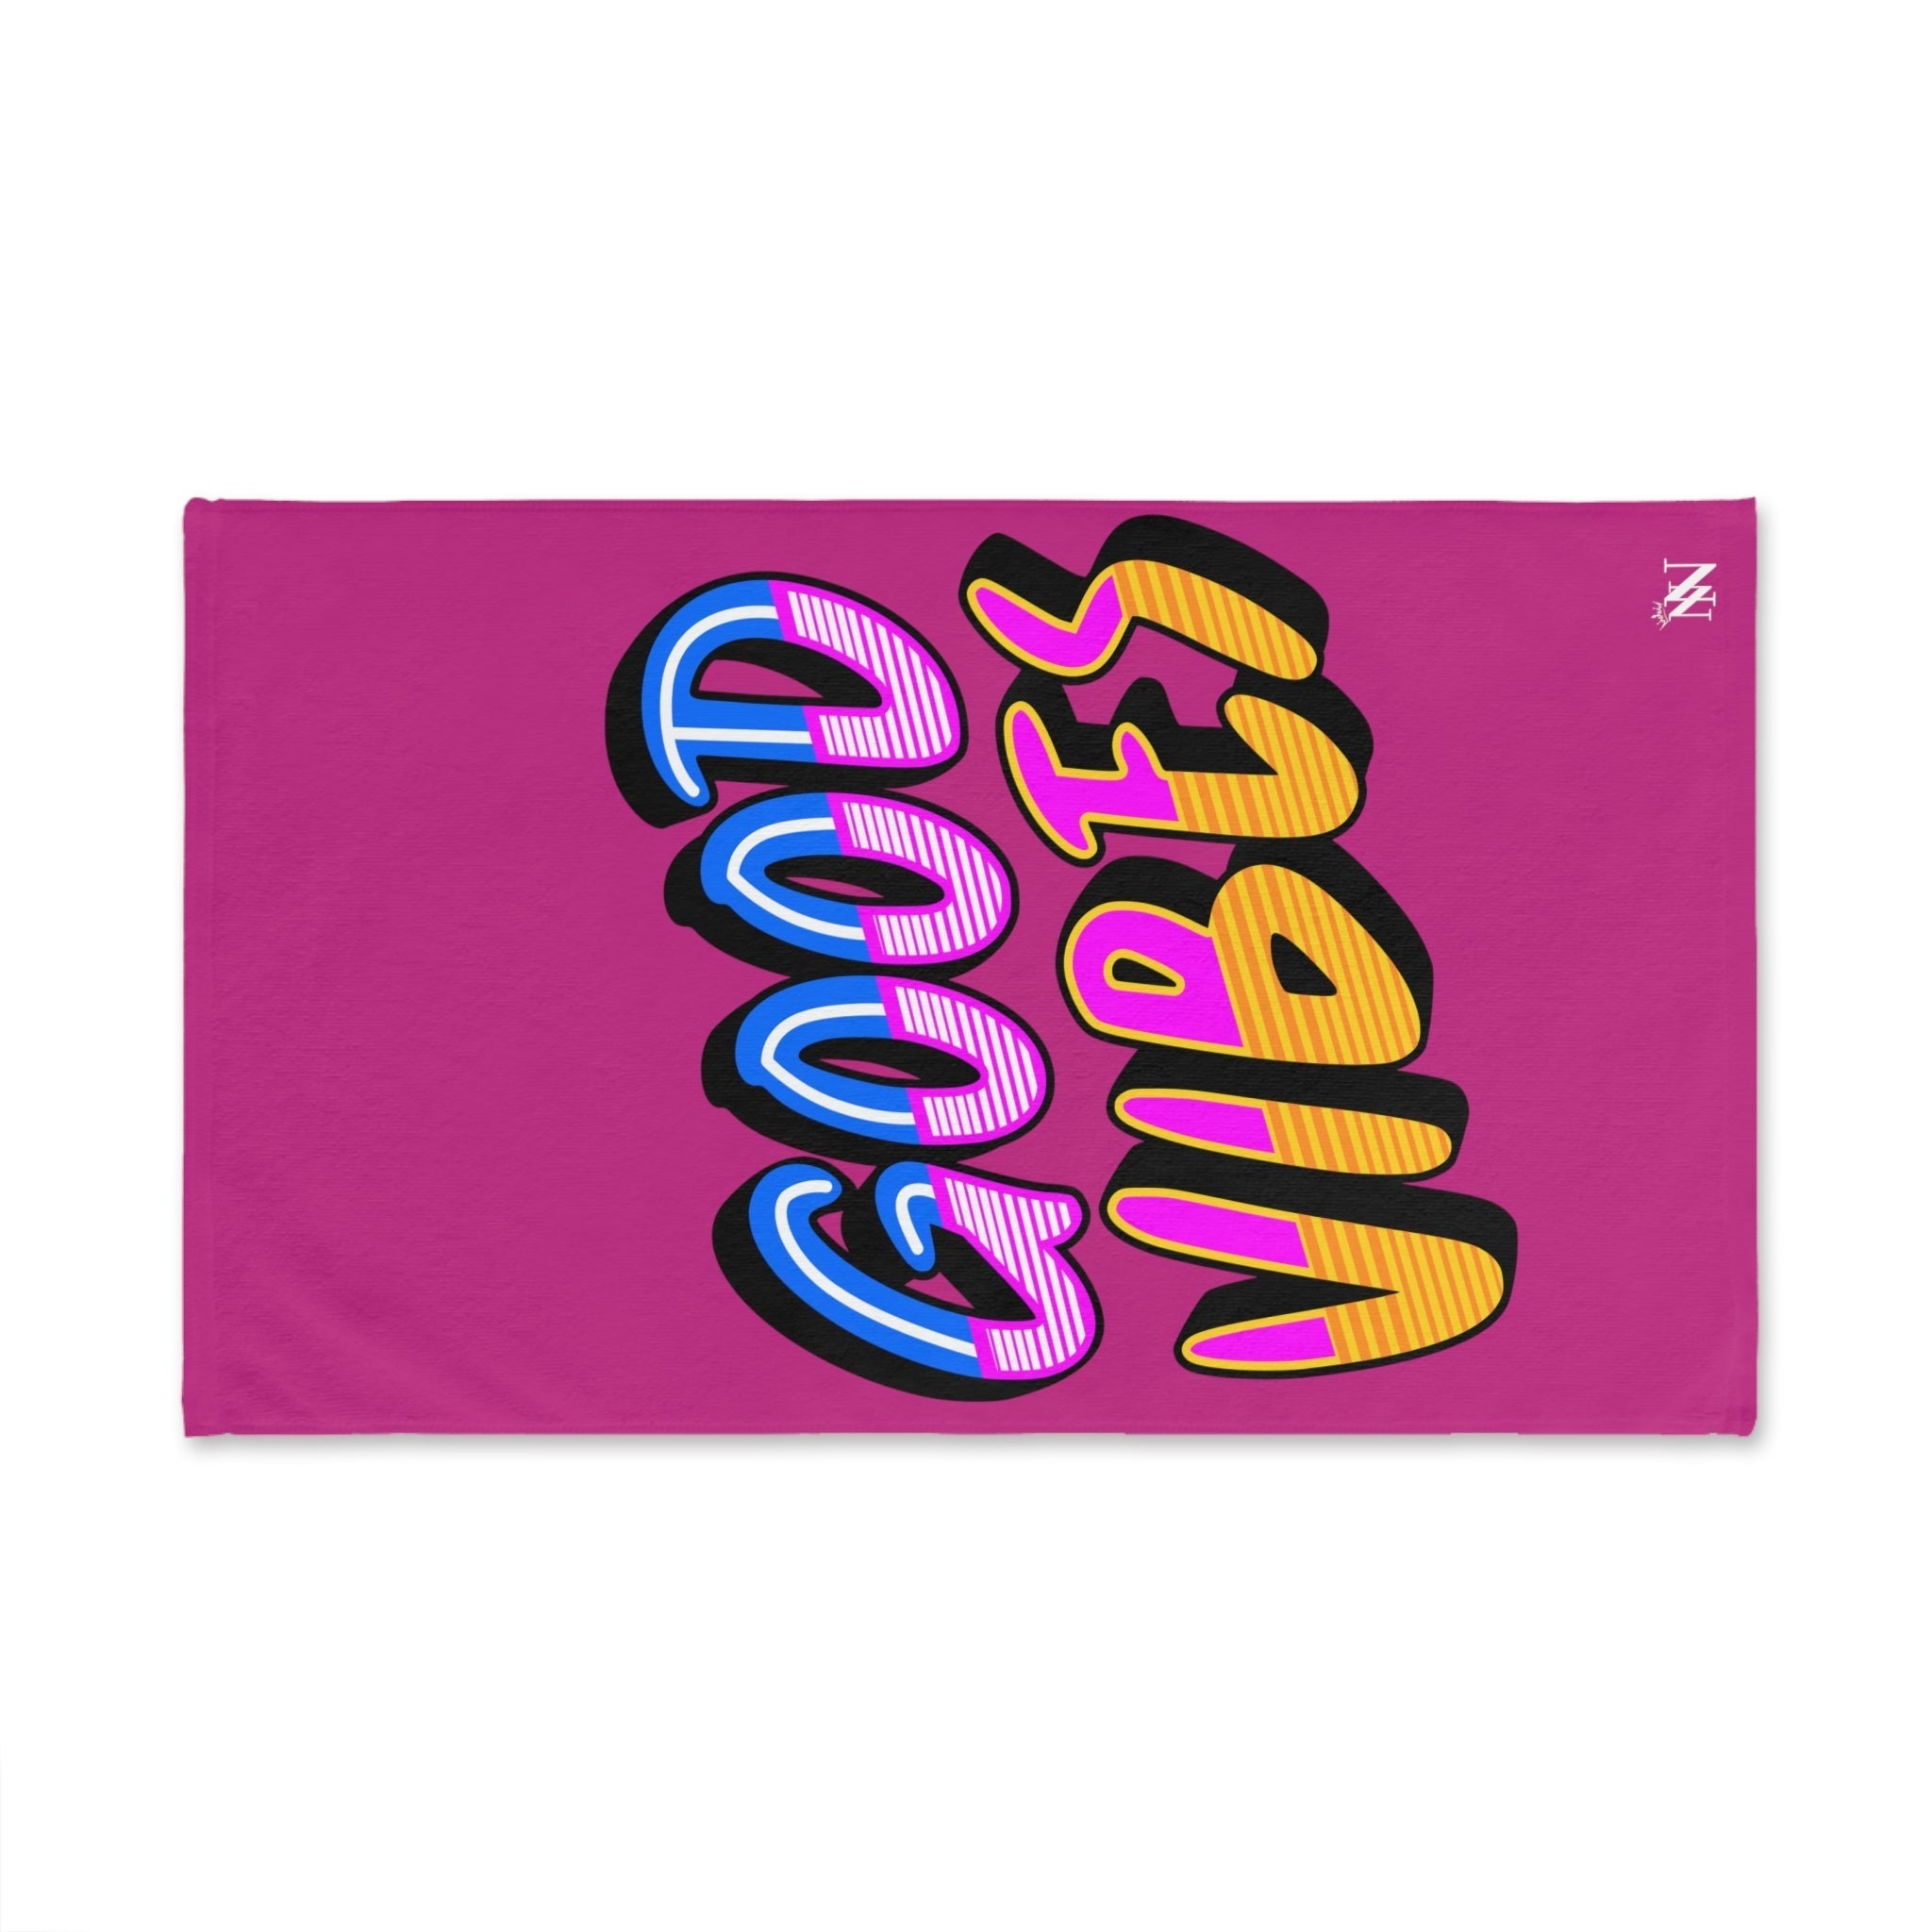 Neon Rainbow Vibes Fuscia | Funny Gifts for Men - Gifts for Him - Birthday Gifts for Men, Him, Husband, Boyfriend, New Couple Gifts, Fathers & Valentines Day Gifts, Hand Towels NECTAR NAPKINS